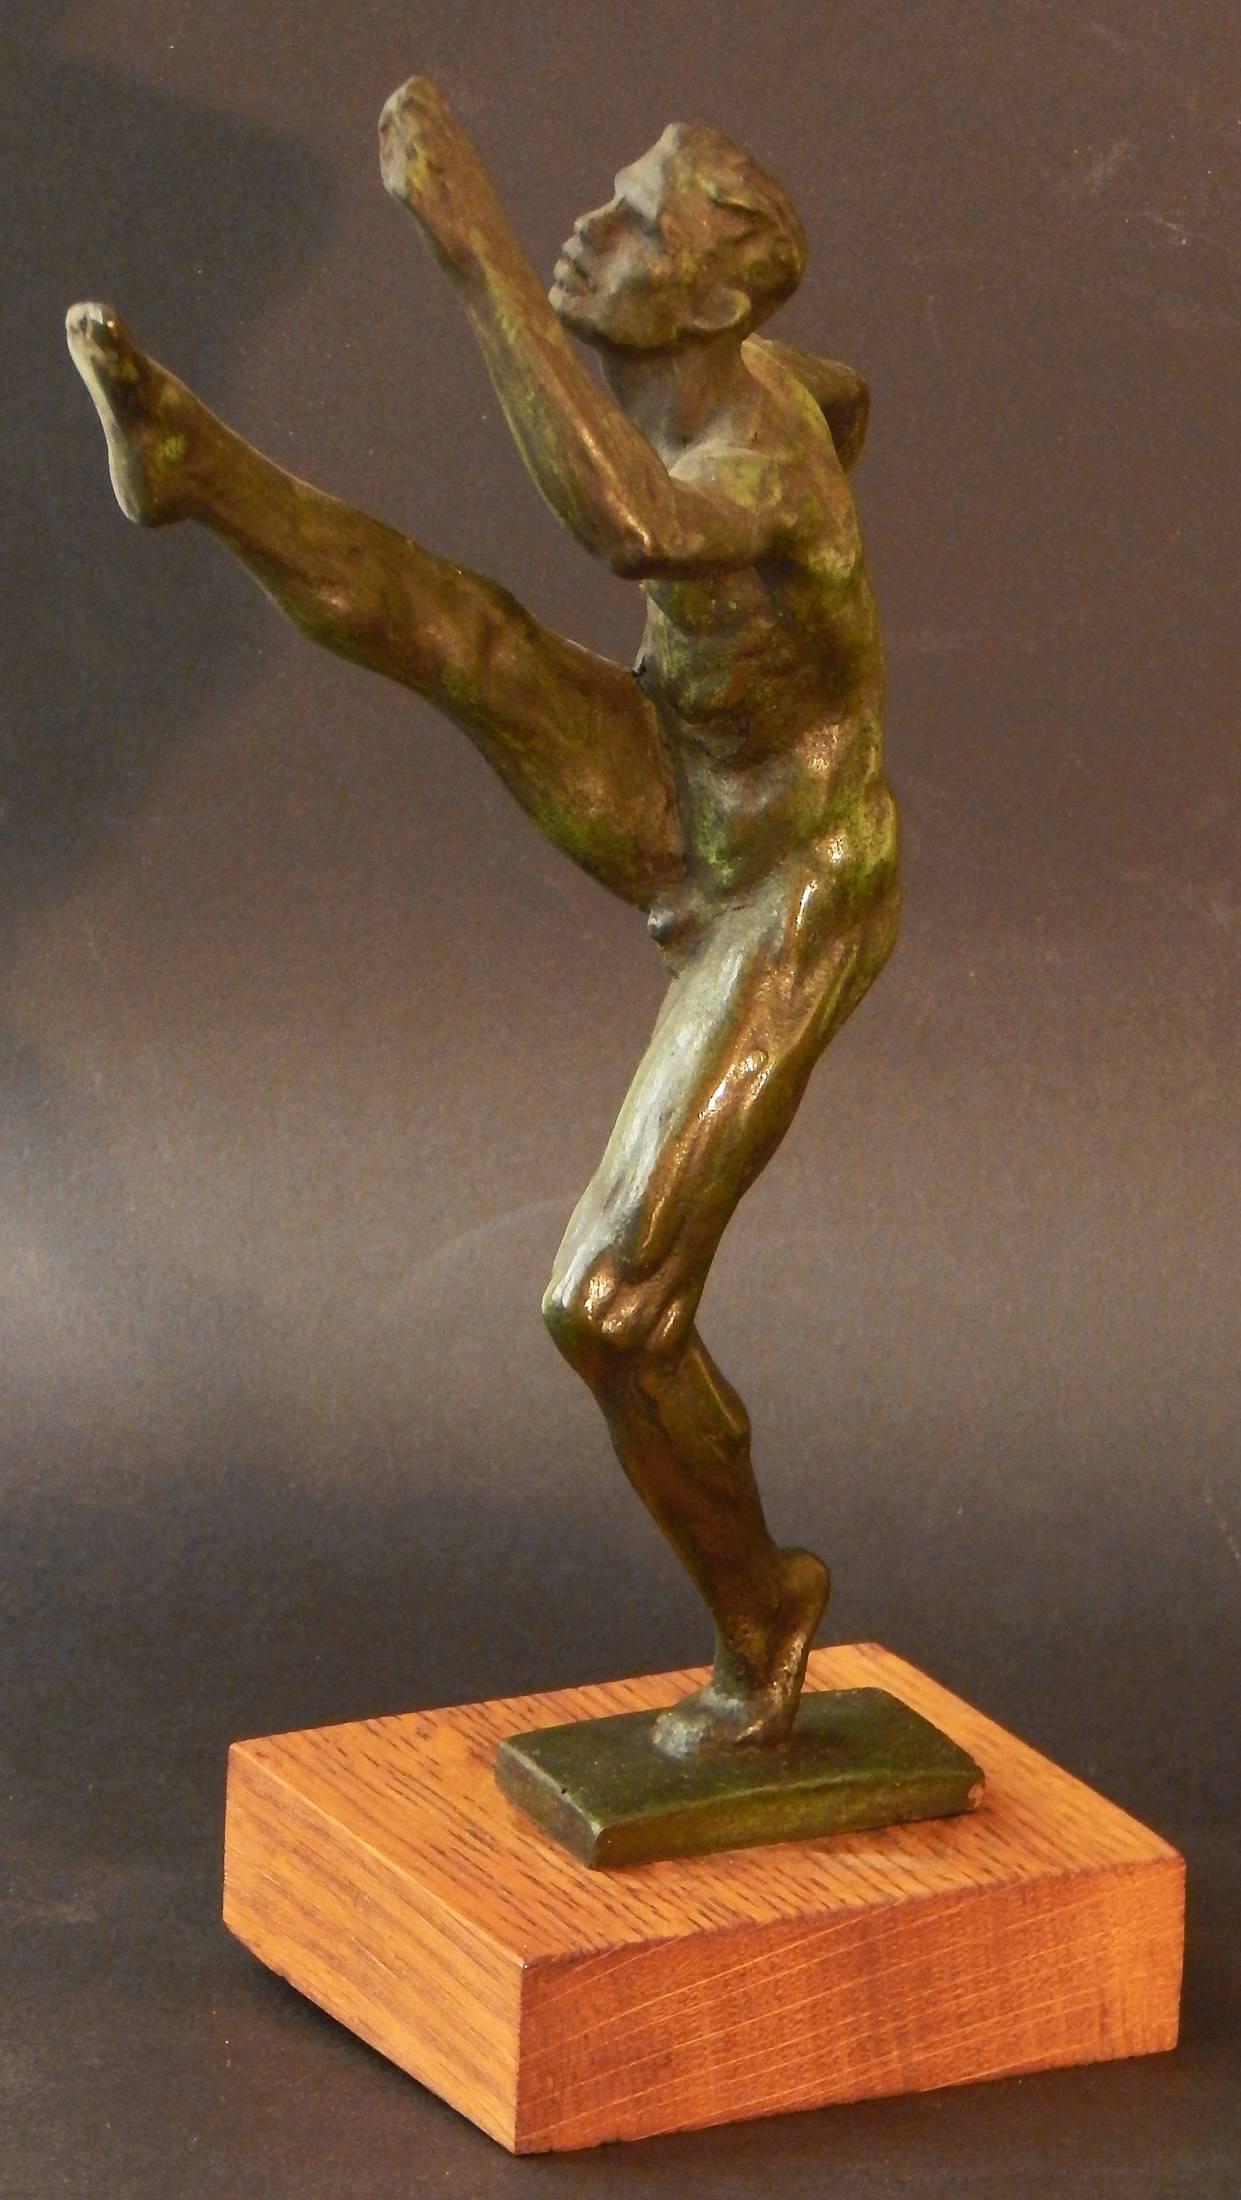 Sculpted in bronze by Joe Brown, second in a line of great American sculptors of athletes in motion, this famous depiction of a football punter dates to the 1940s. Brown studied under, and was mentored by, Robert Tait McKenzie, a physician, educator